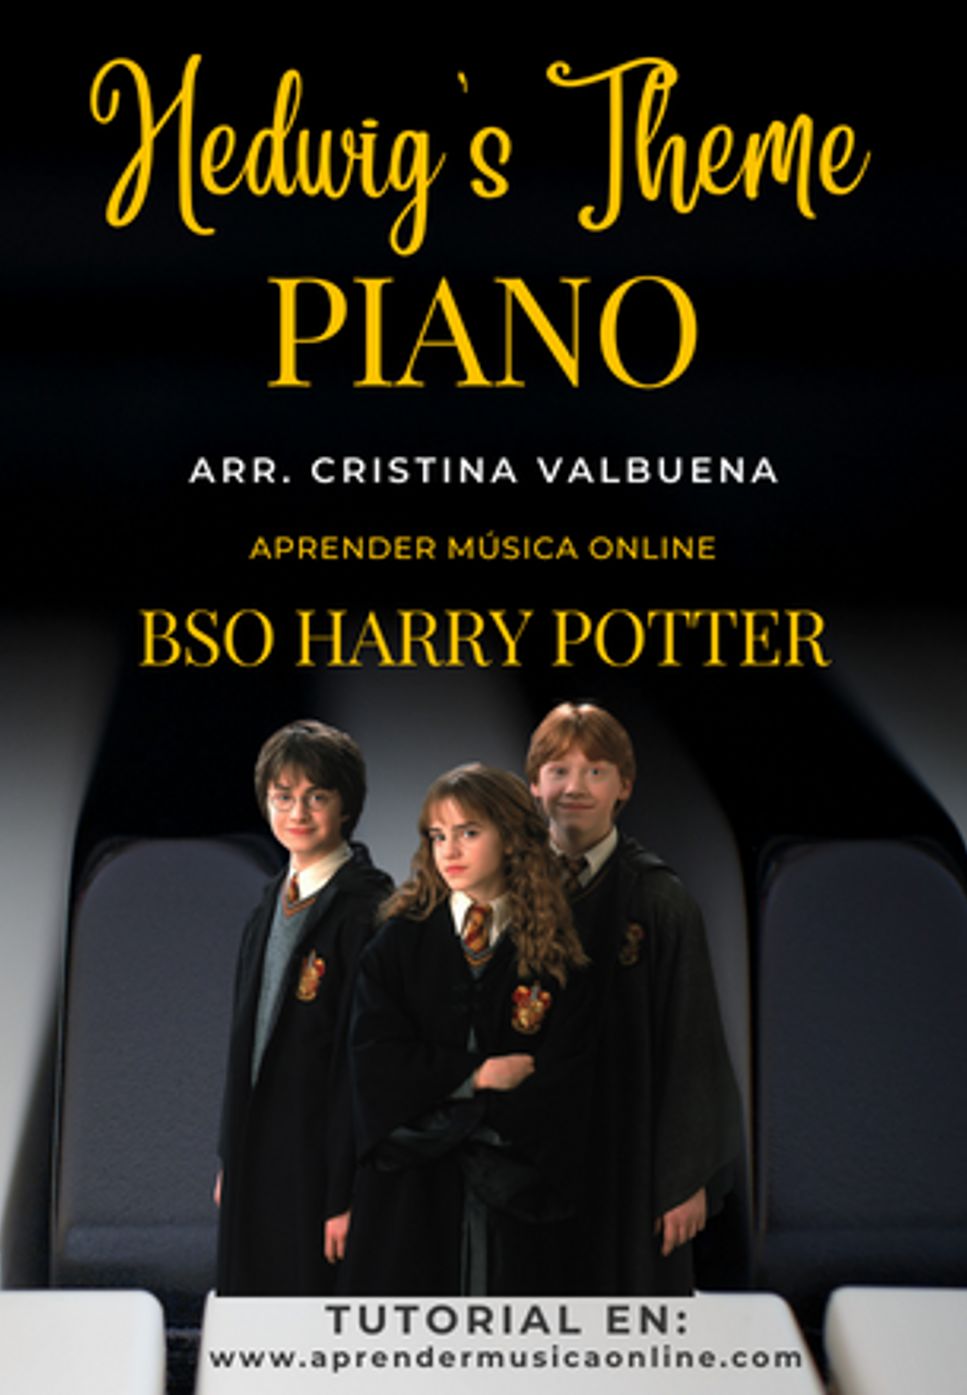 John Williams - Hedwig's Theme - BSO Harry Potter by Cristina Valbuena